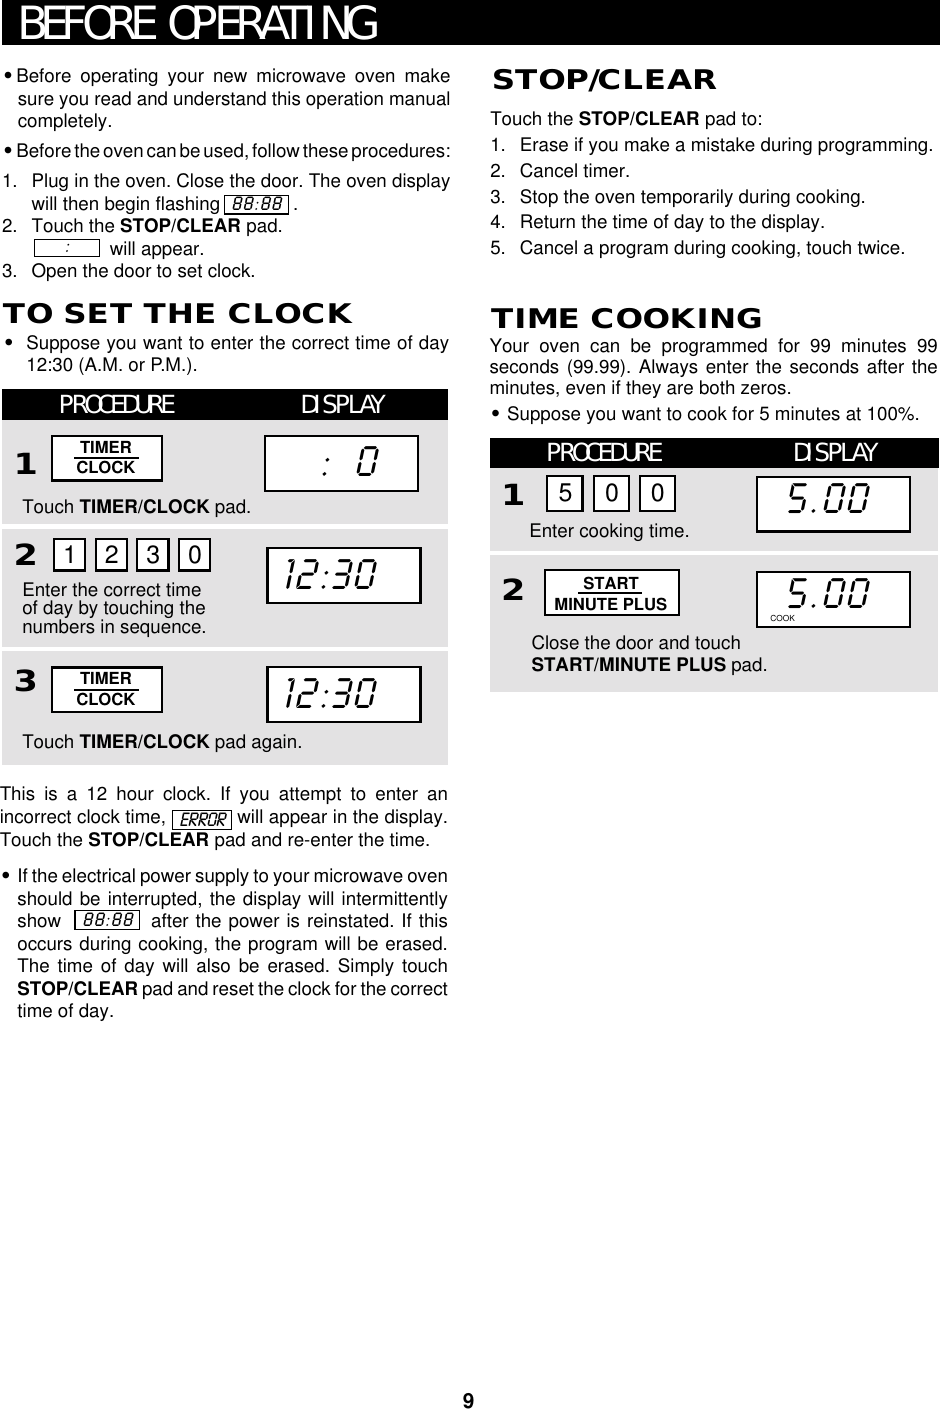 9This is a 12 hour clock. If you attempt to enter anincorrect clock time,   will appear in the display.Touch the STOP/CLEAR pad and re-enter the time.•If the electrical power supply to your microwave ovenshould be interrupted, the display will intermittentlyshow             after the power is reinstated. If thisoccurs during cooking, the program will be erased.The time of day will also be erased. Simply touchSTOP/CLEAR pad and reset the clock for the correcttime of day.•Before operating your new microwave oven makesure you read and understand this operation manualcompletely.•Before the oven can be used, follow these procedures:1. Plug in the oven. Close the door. The oven displaywill then begin flashing              .2. Touch the STOP/CLEAR pad.               will appear.3. Open the door to set clock.BEFORE OPERATING88:88:      ERRORTouch the STOP/CLEAR pad to:1. Erase if you make a mistake during programming.2. Cancel timer.3. Stop the oven temporarily during cooking.4. Return the time of day to the display.5. Cancel a program during cooking, touch twice.88:88TO SET THE CLOCK•Suppose you want to enter the correct time of day12:30 (A.M. or P.M.).PROCEDURE DISPLAY123STOP/CLEARTouch TIMER/CLOCK pad.Touch TIMER/CLOCK pad again.Enter the correct timeof day by touching thenumbers in sequence.1230TIMERCLOCKTIMERCLOCK12:3012:30     :   0Your oven can be programmed for 99 minutes 99seconds (99.99). Always enter the seconds after theminutes, even if they are both zeros.•Suppose you want to cook for 5 minutes at 100%.TIME COOKINGPROCEDURE DISPLAY12Close the door and touchSTART/MINUTE PLUS pad.Enter cooking time.5 0 015.0015.00COOK DEFROSTSTARTMINUTE PLUS